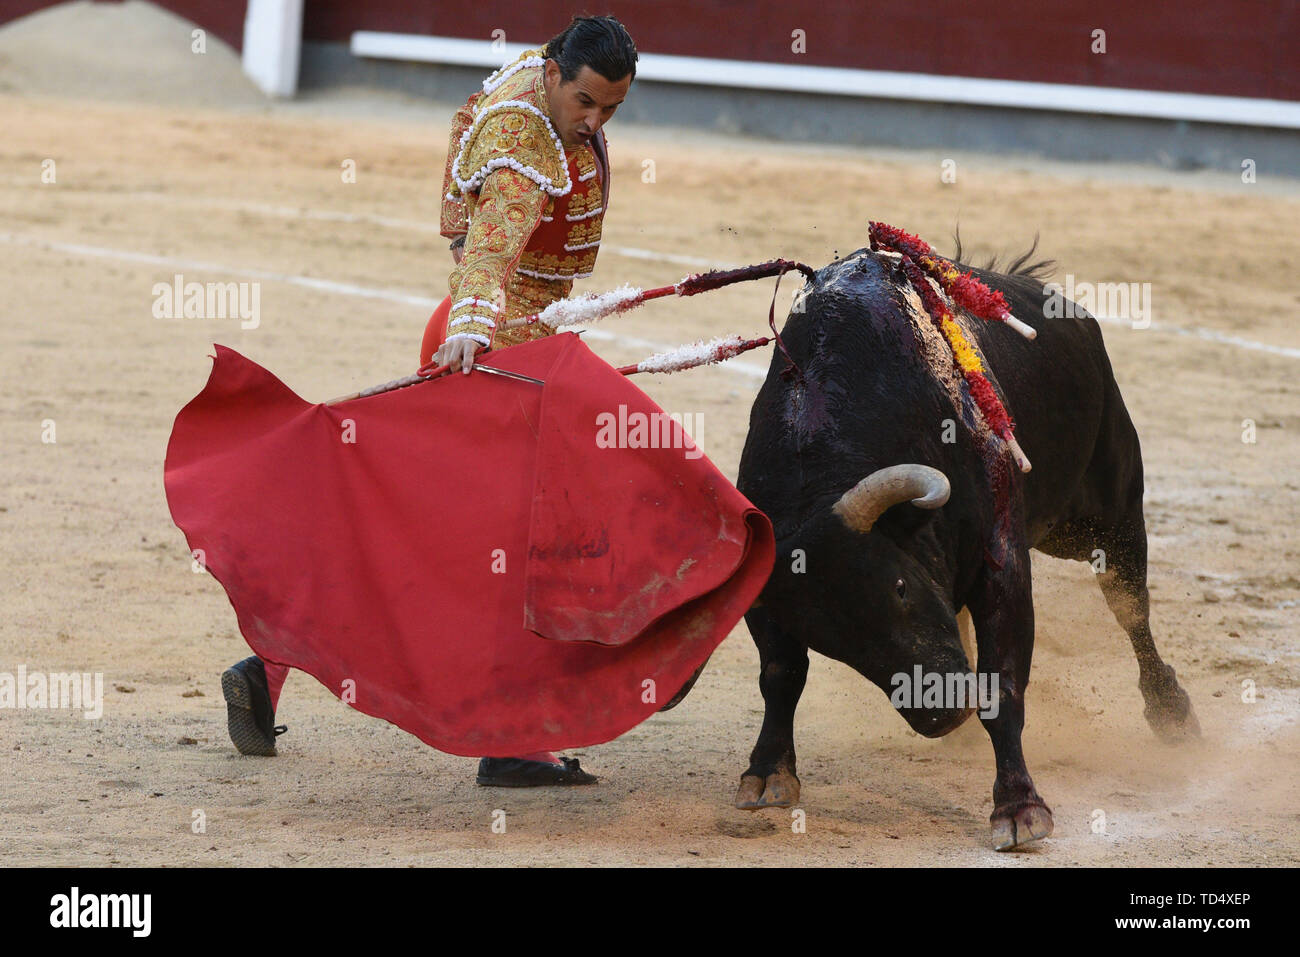 Madrid, Spain. 11th June, 2019. Spanish matador Ivan Vicente performs with  a Valdellan ranch fighting bull during a bullfight at the Las Ventas  bullring in the 2019 San Isidro festival in Madrid.